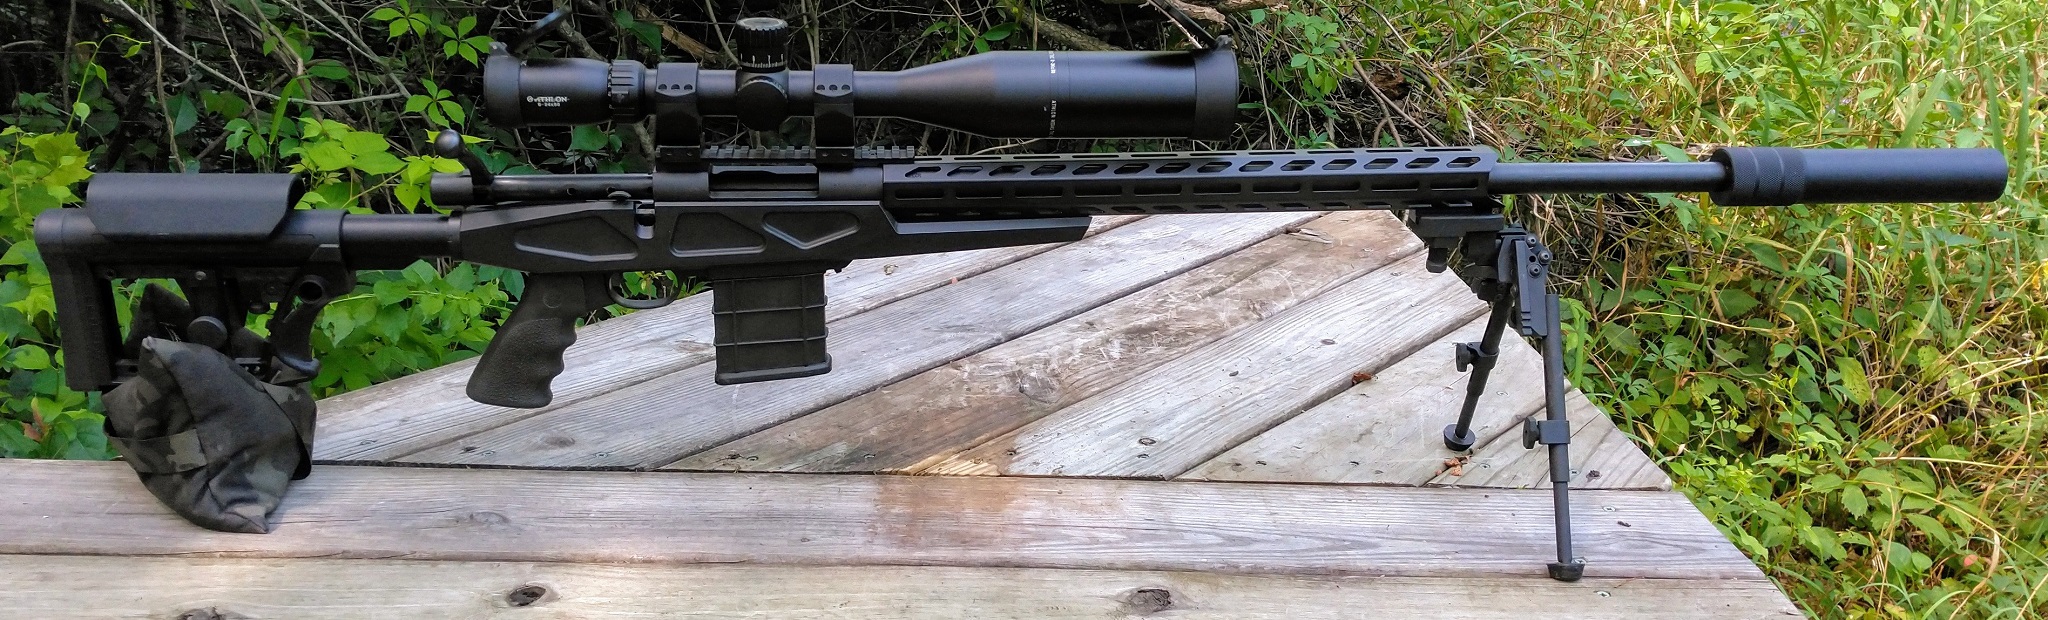 Howa APC with Can On The Range _E 08-03-19_1.jpg